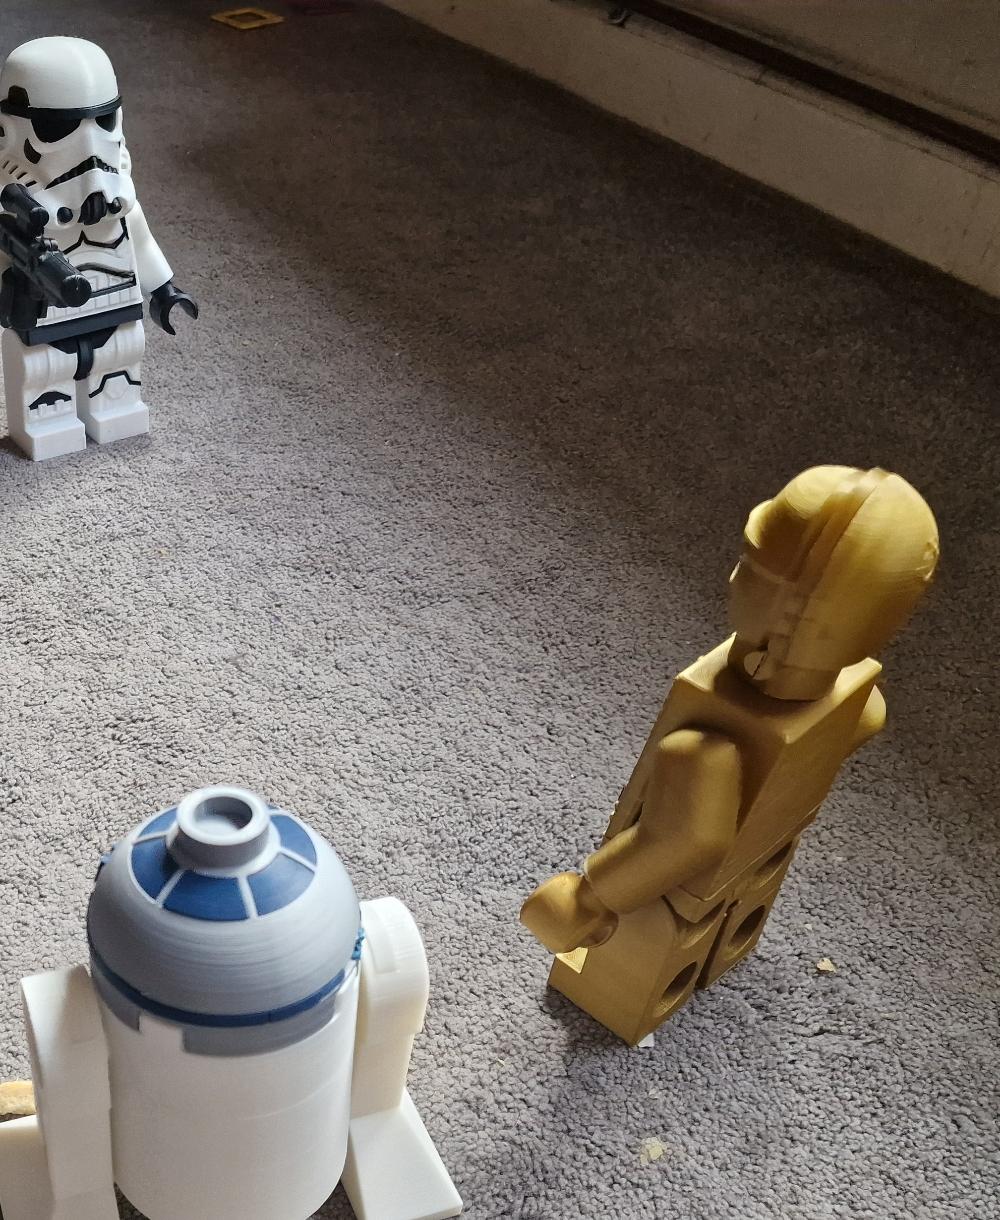 R2-D2 (6:1 LEGO-inspired brick figure, NO MMU/AMS, NO supports, NO glue) - My boy love them . Any chance you could add an R5D4 head ? The body is the same as R2D2 - 3d model